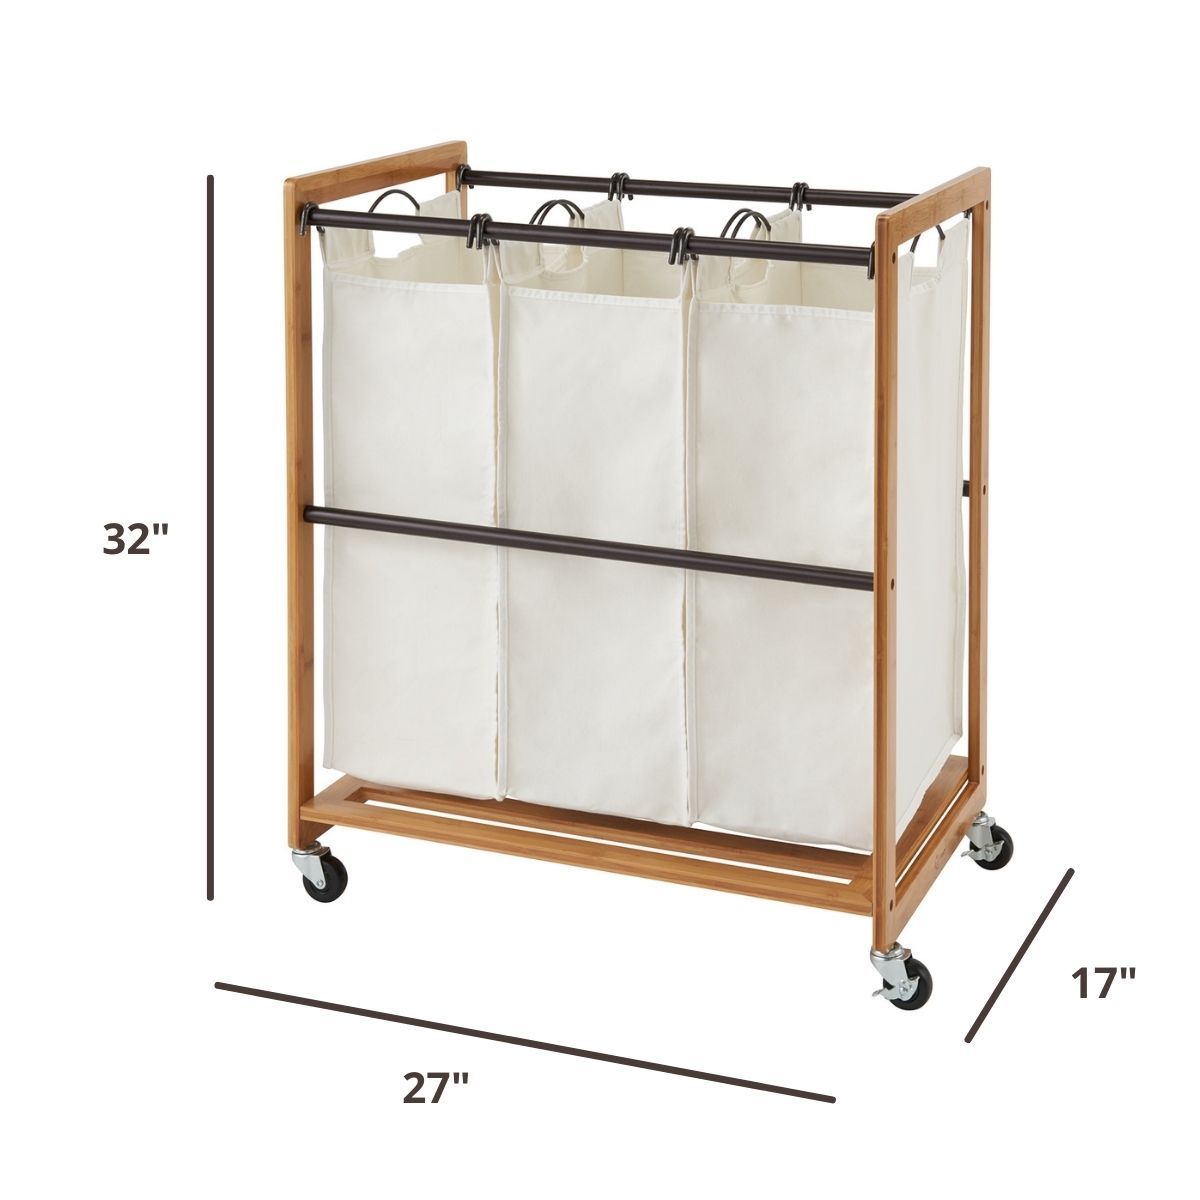 32 inches tall by 27 inches wide by 17 inches deep laundry cart